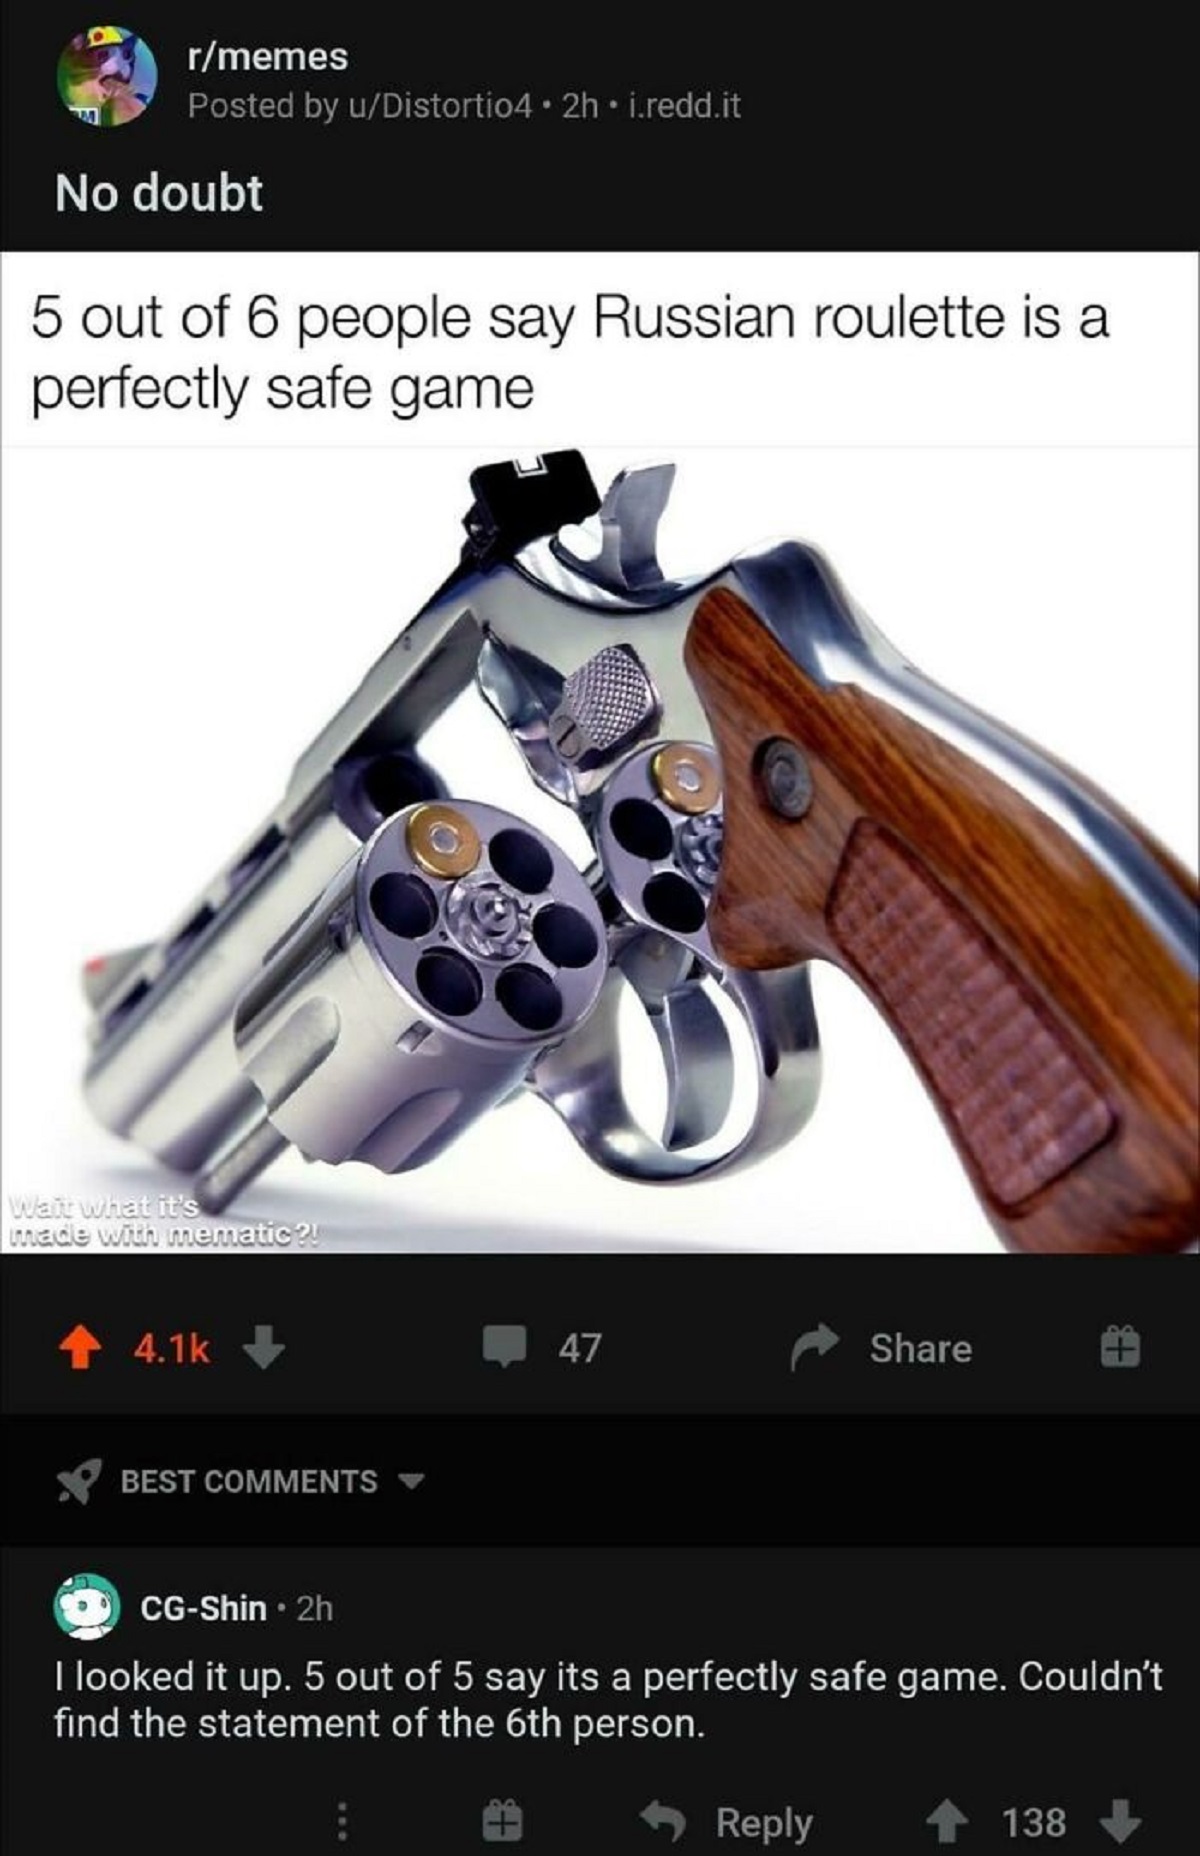 funny replies better than the original - rmemes Posted by uDistortio4. 2h.i.redd.it No doubt 5 out of 6 people say Russian roulette is a perfectly safe game Wait what it's made with mematic?! Best 47 CgShin.2h I looked it up. 5 out of 5 say its a perfectl